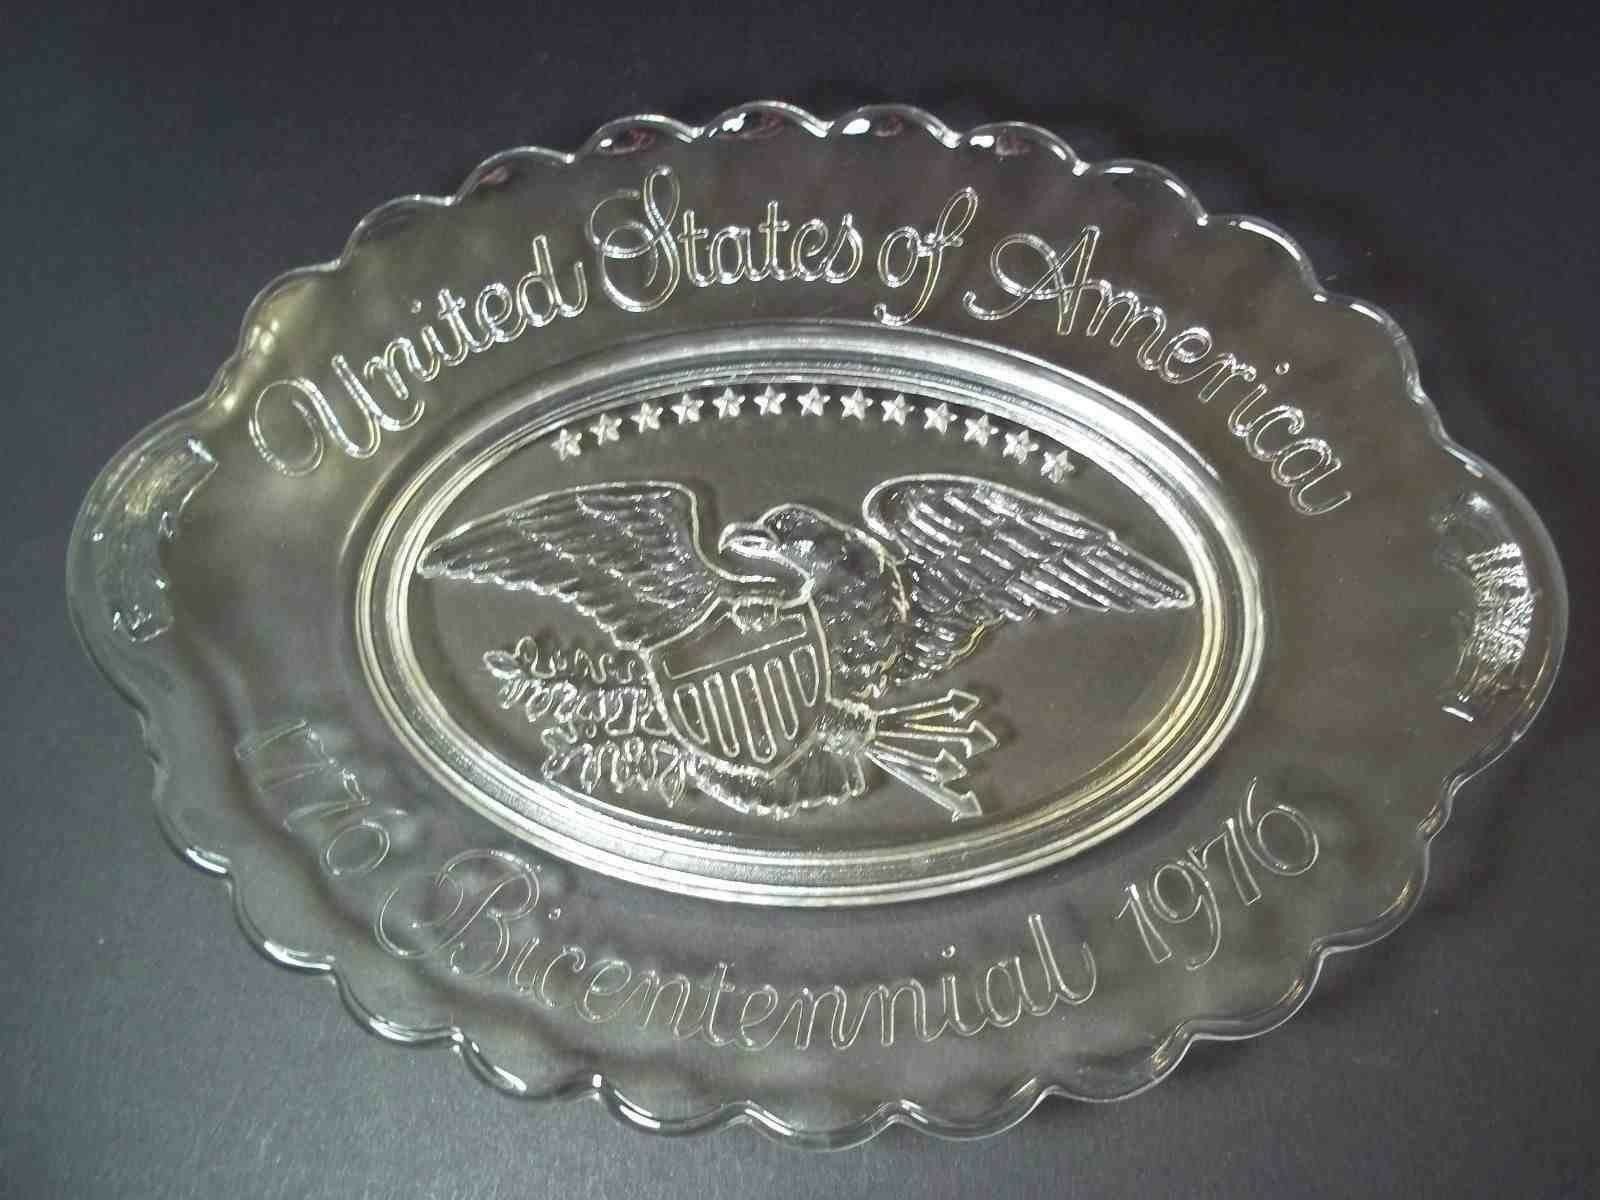 Primary image for Avon clear glass oval dish Bicentennial Eagle 1976 9" plate